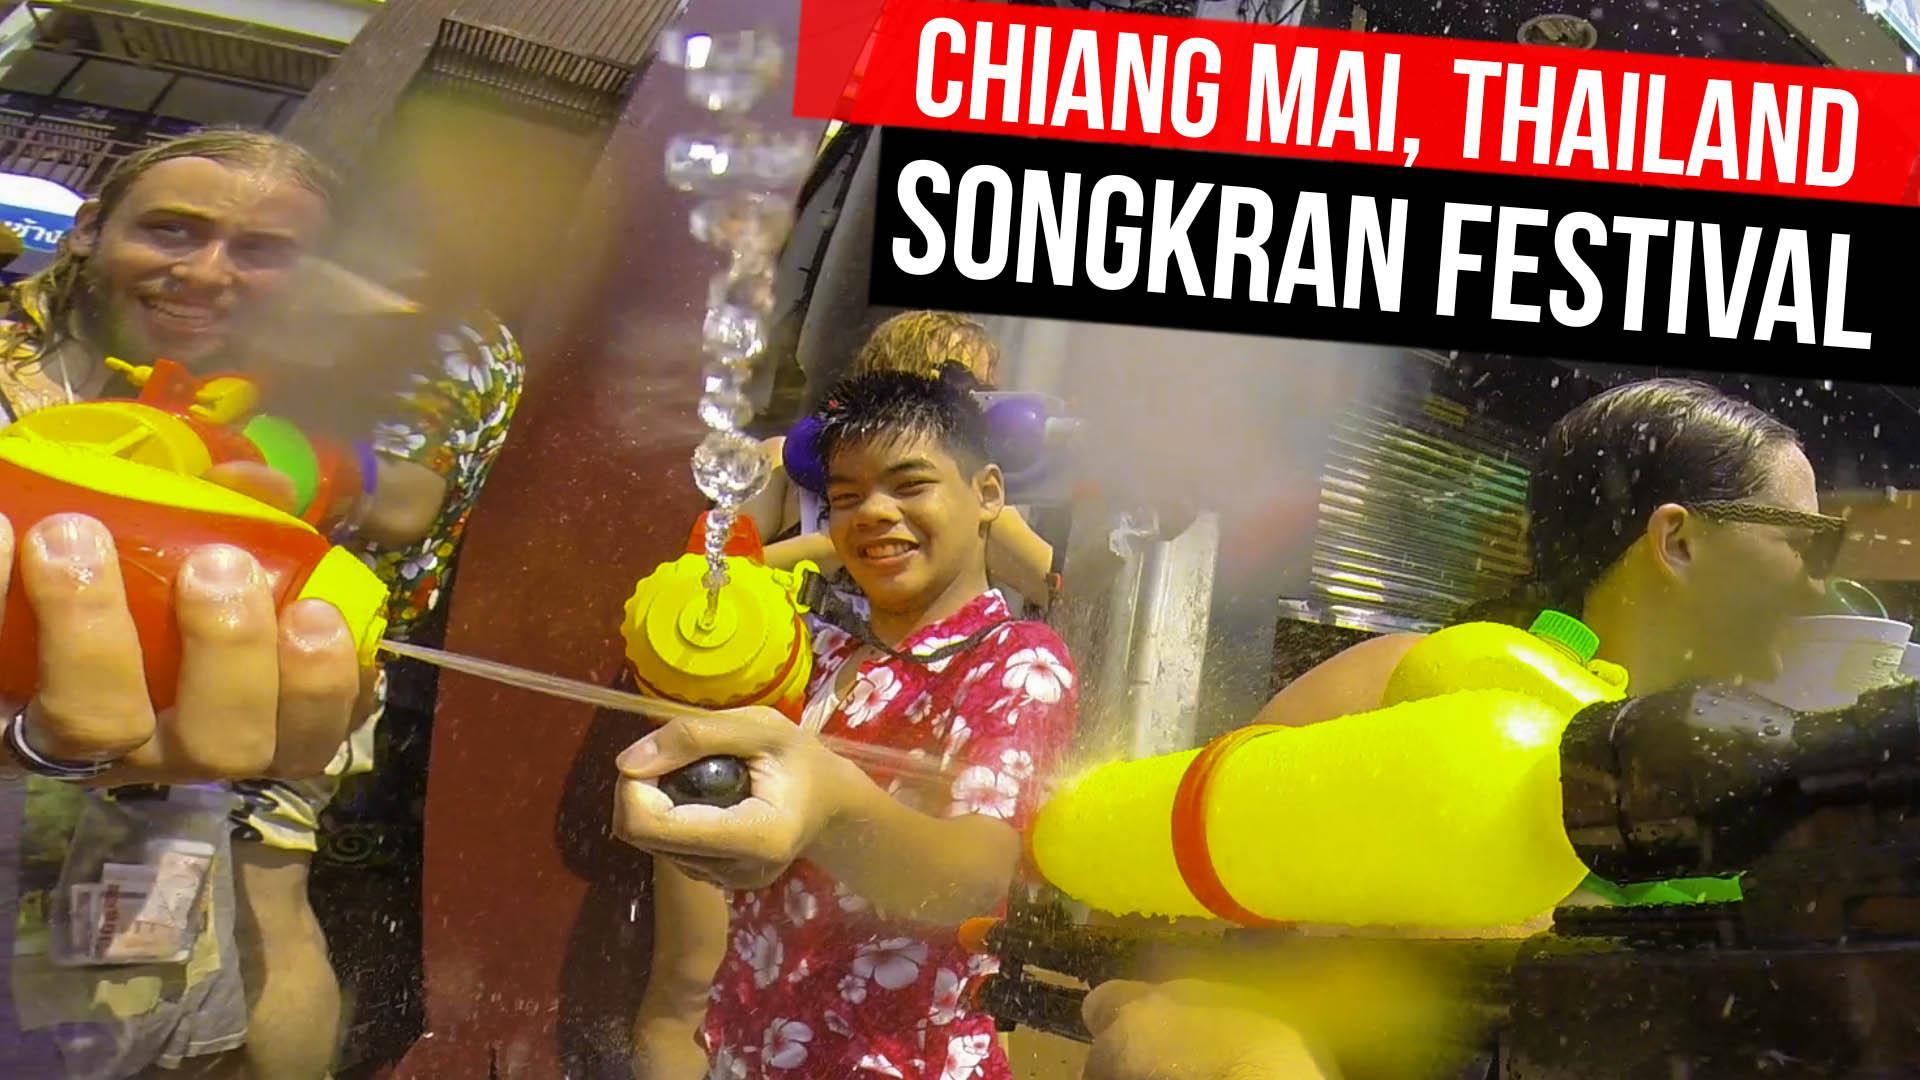 Songkran Festival 2019 Guide and Tips. Thai New Year